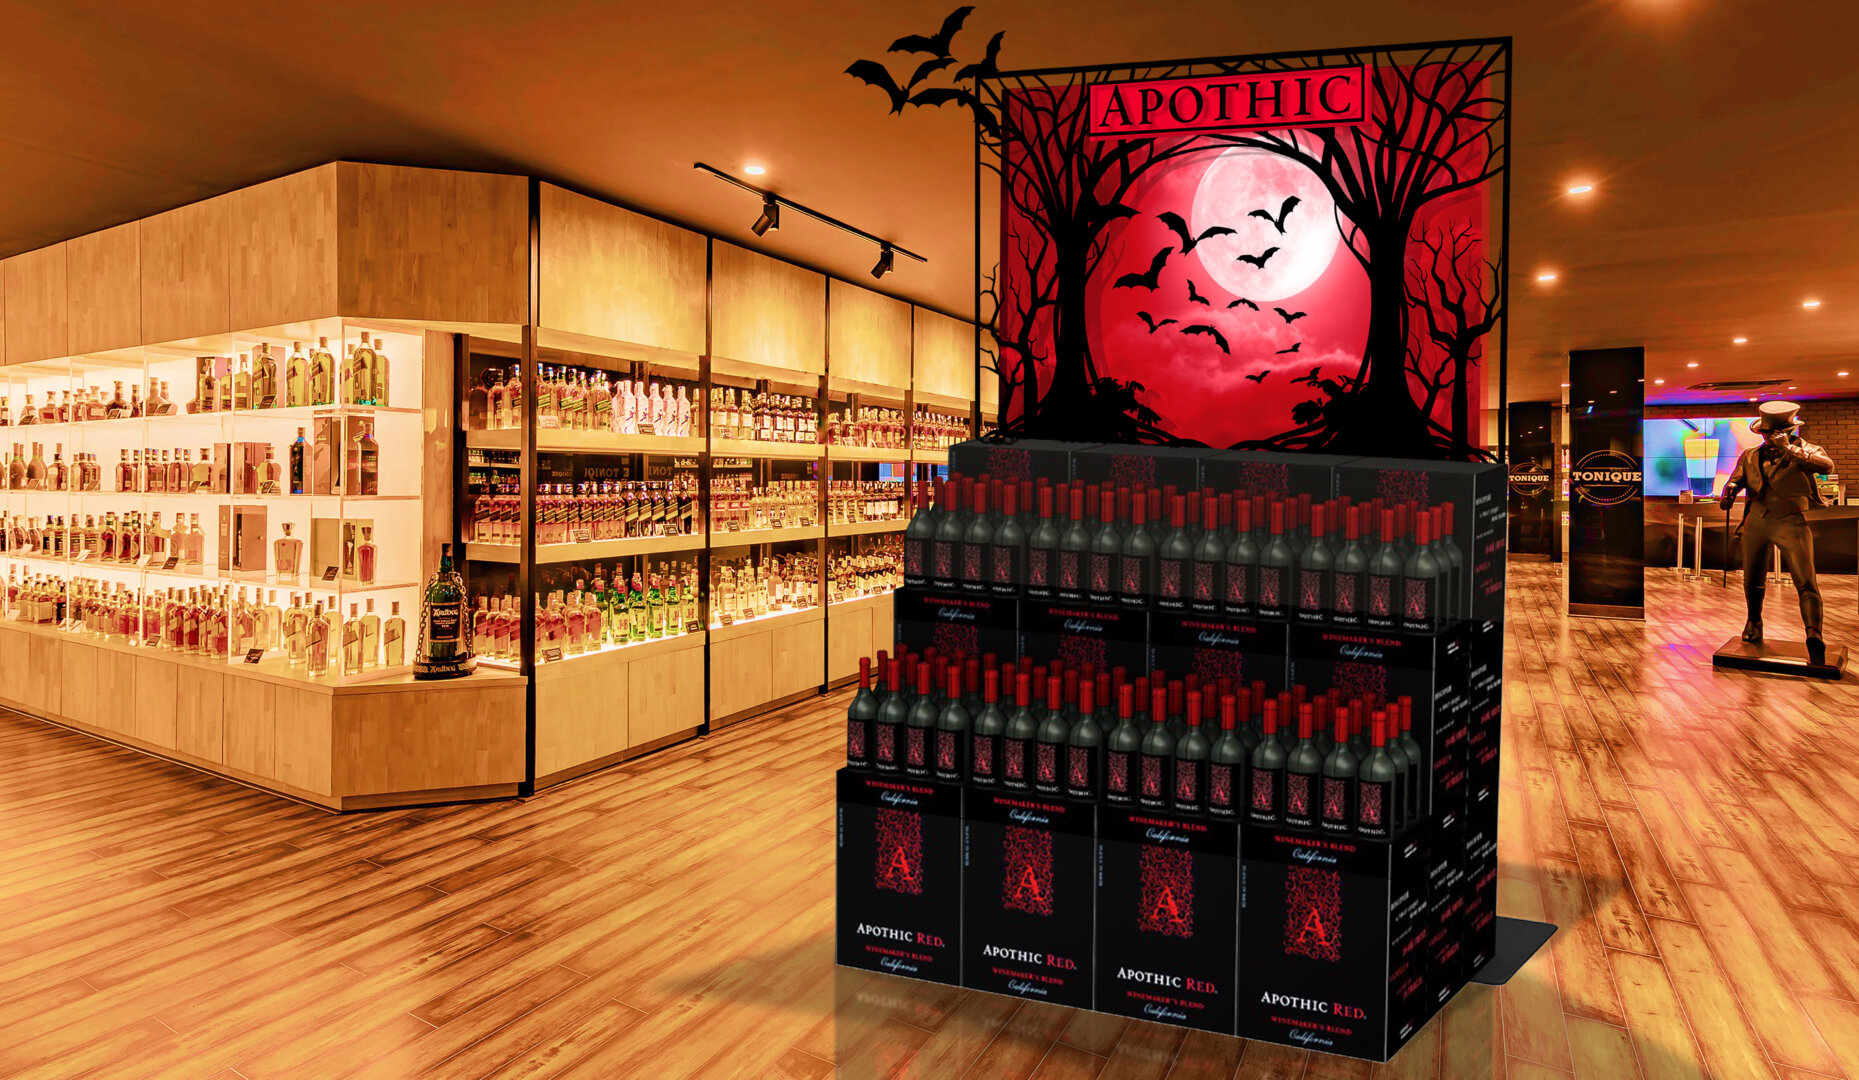 An apothic halloween store display featuring black trees and bats with a red moon in the background. The display is surrounded by cases of wine in a store environment.